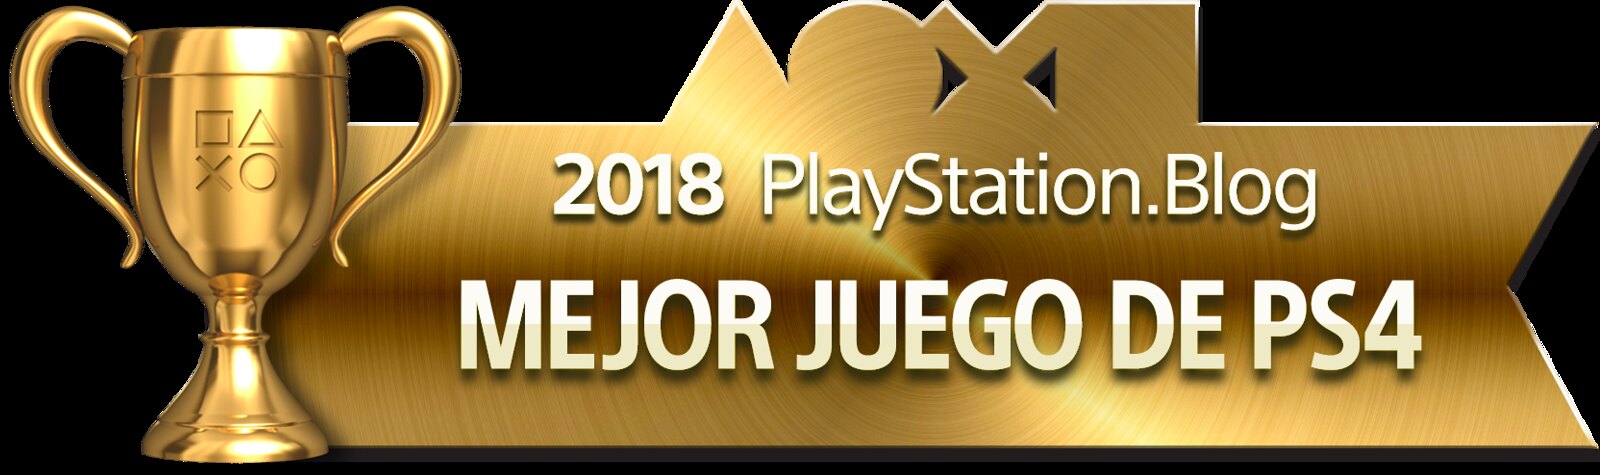 Best PS4 Game - Gold